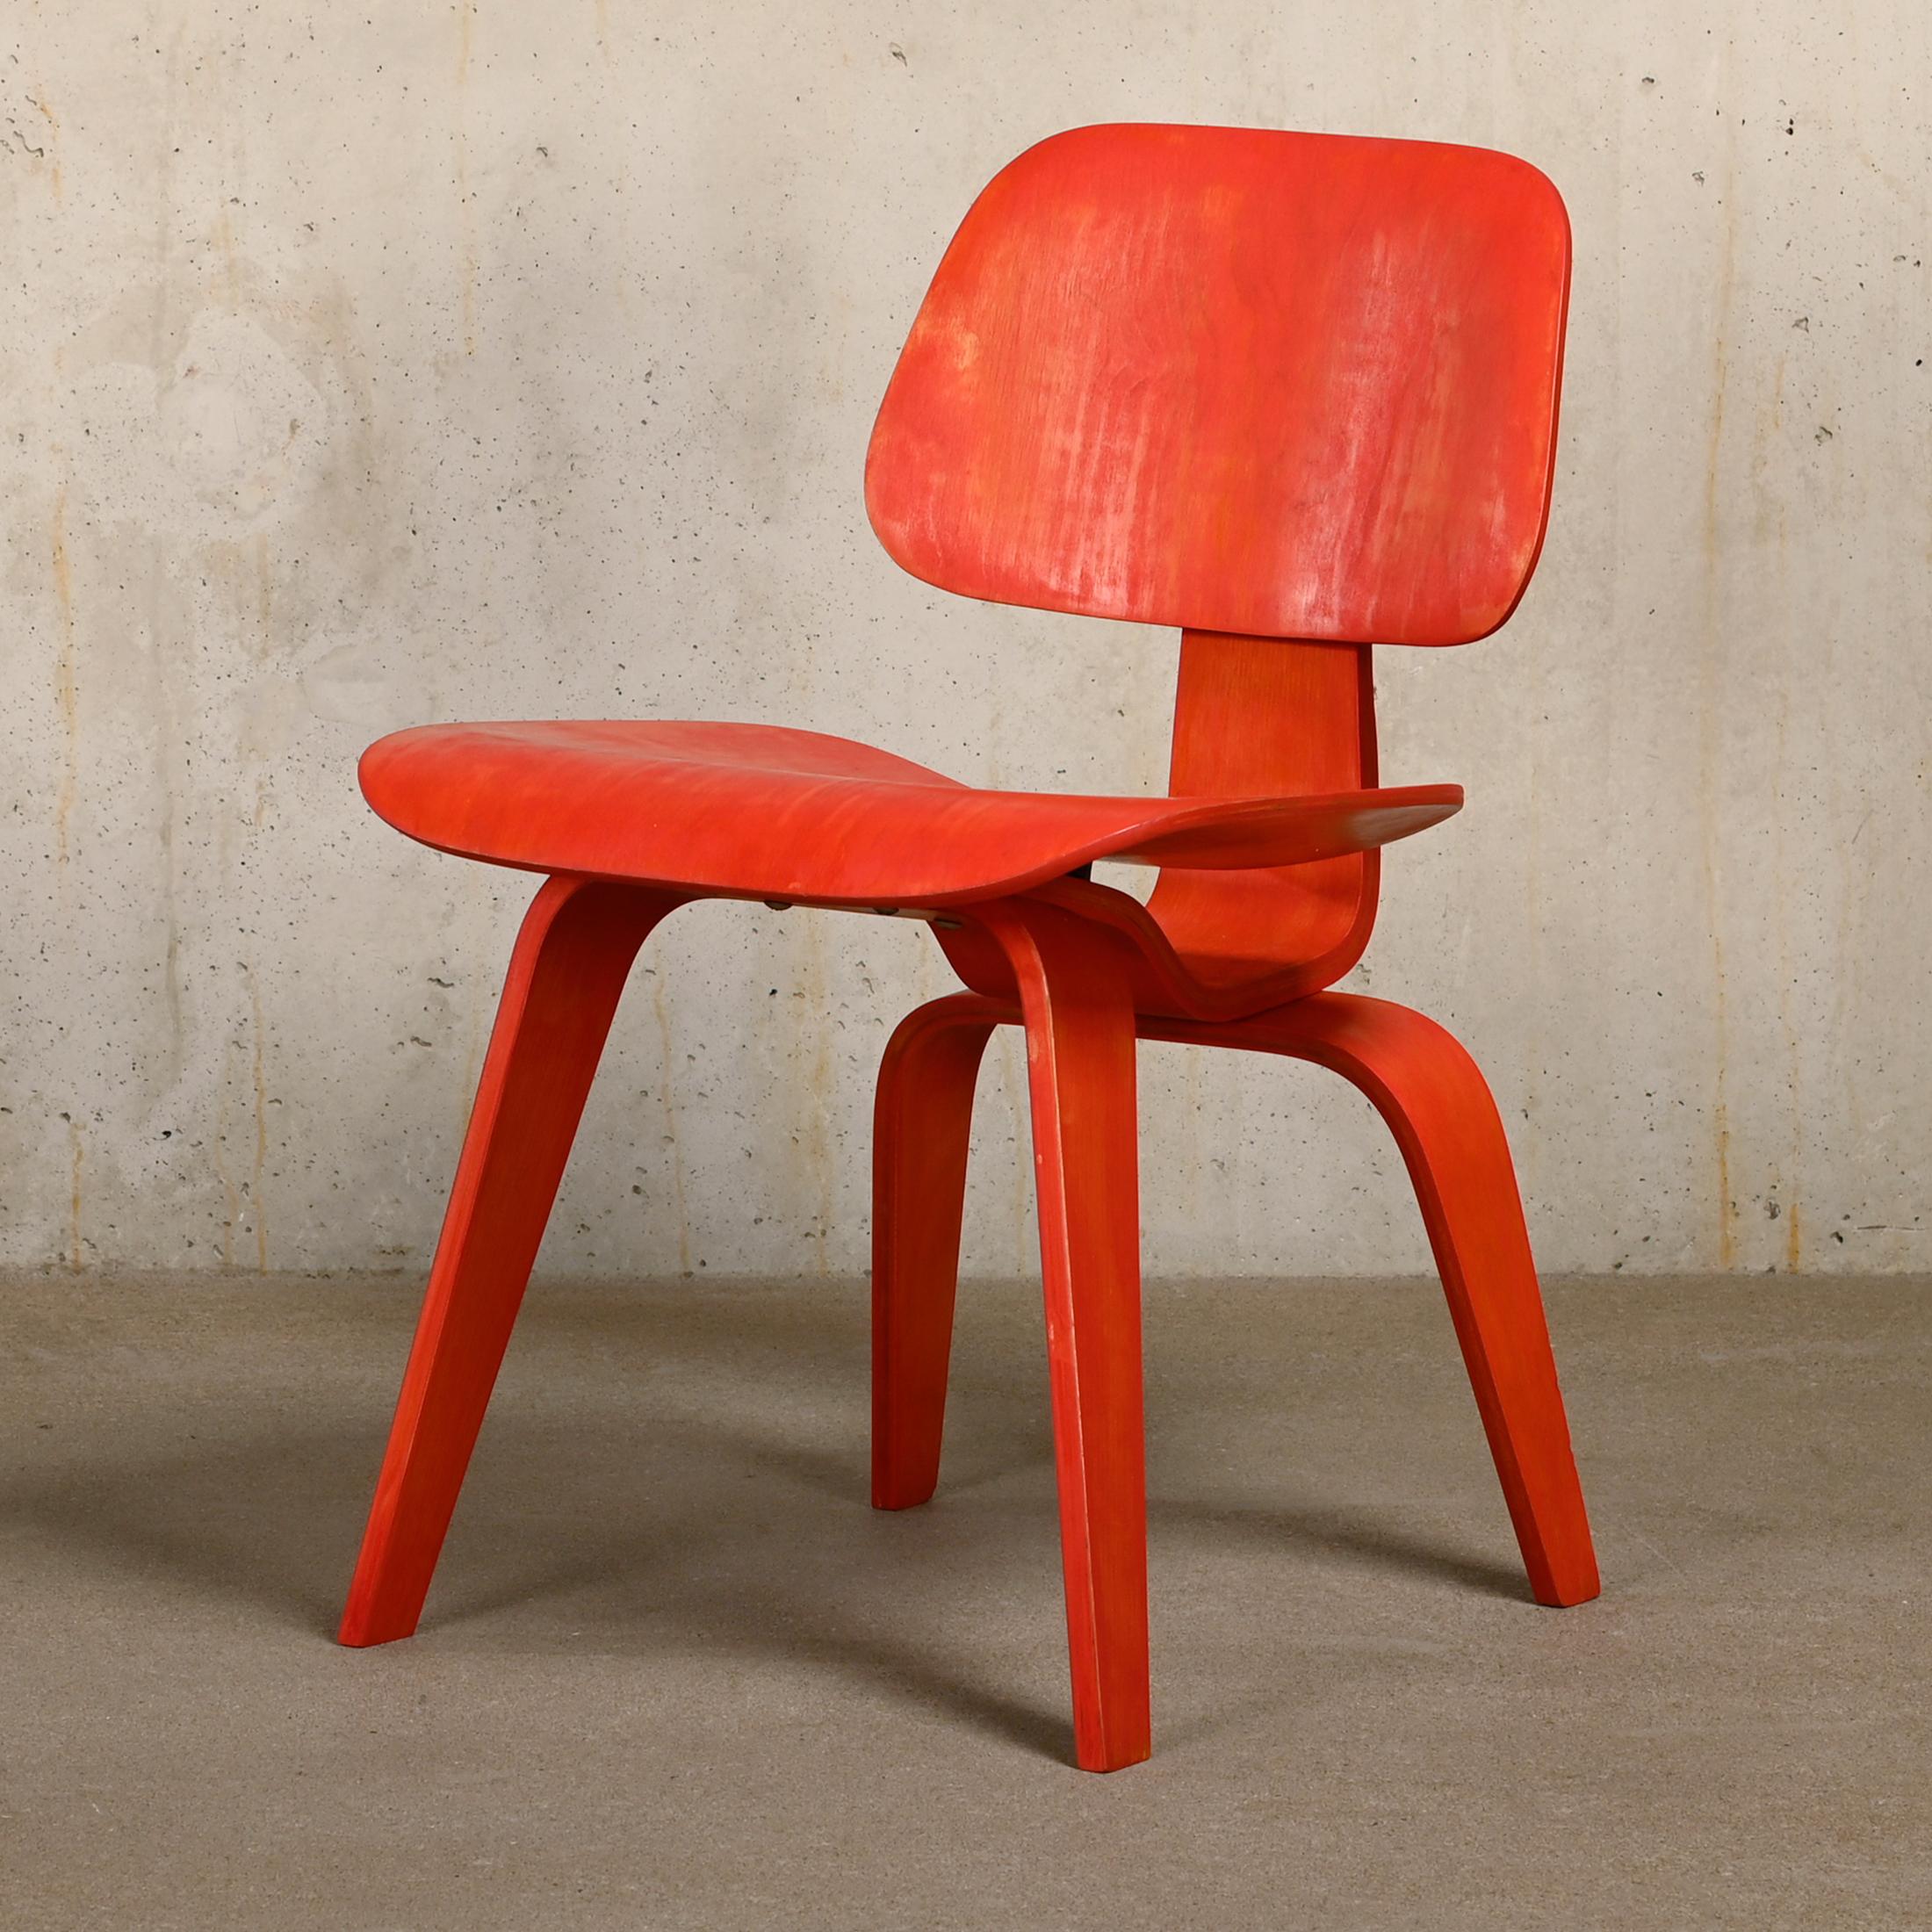 Charles & Ray Eames Early DCW Red aniline dye Ash Dining Chair for Evans Plywood 1